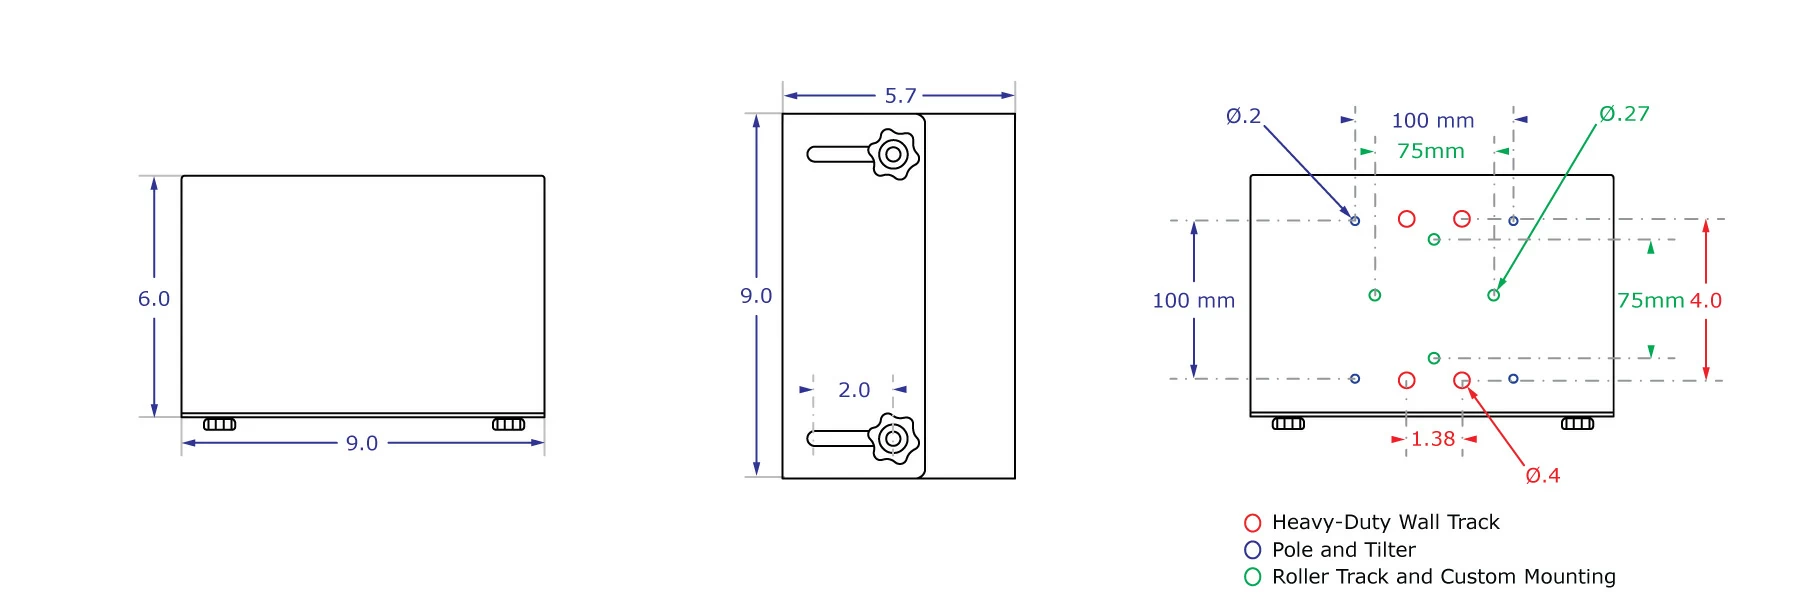 Medium CPU holder specification drawing with measurements for both sides and bottom